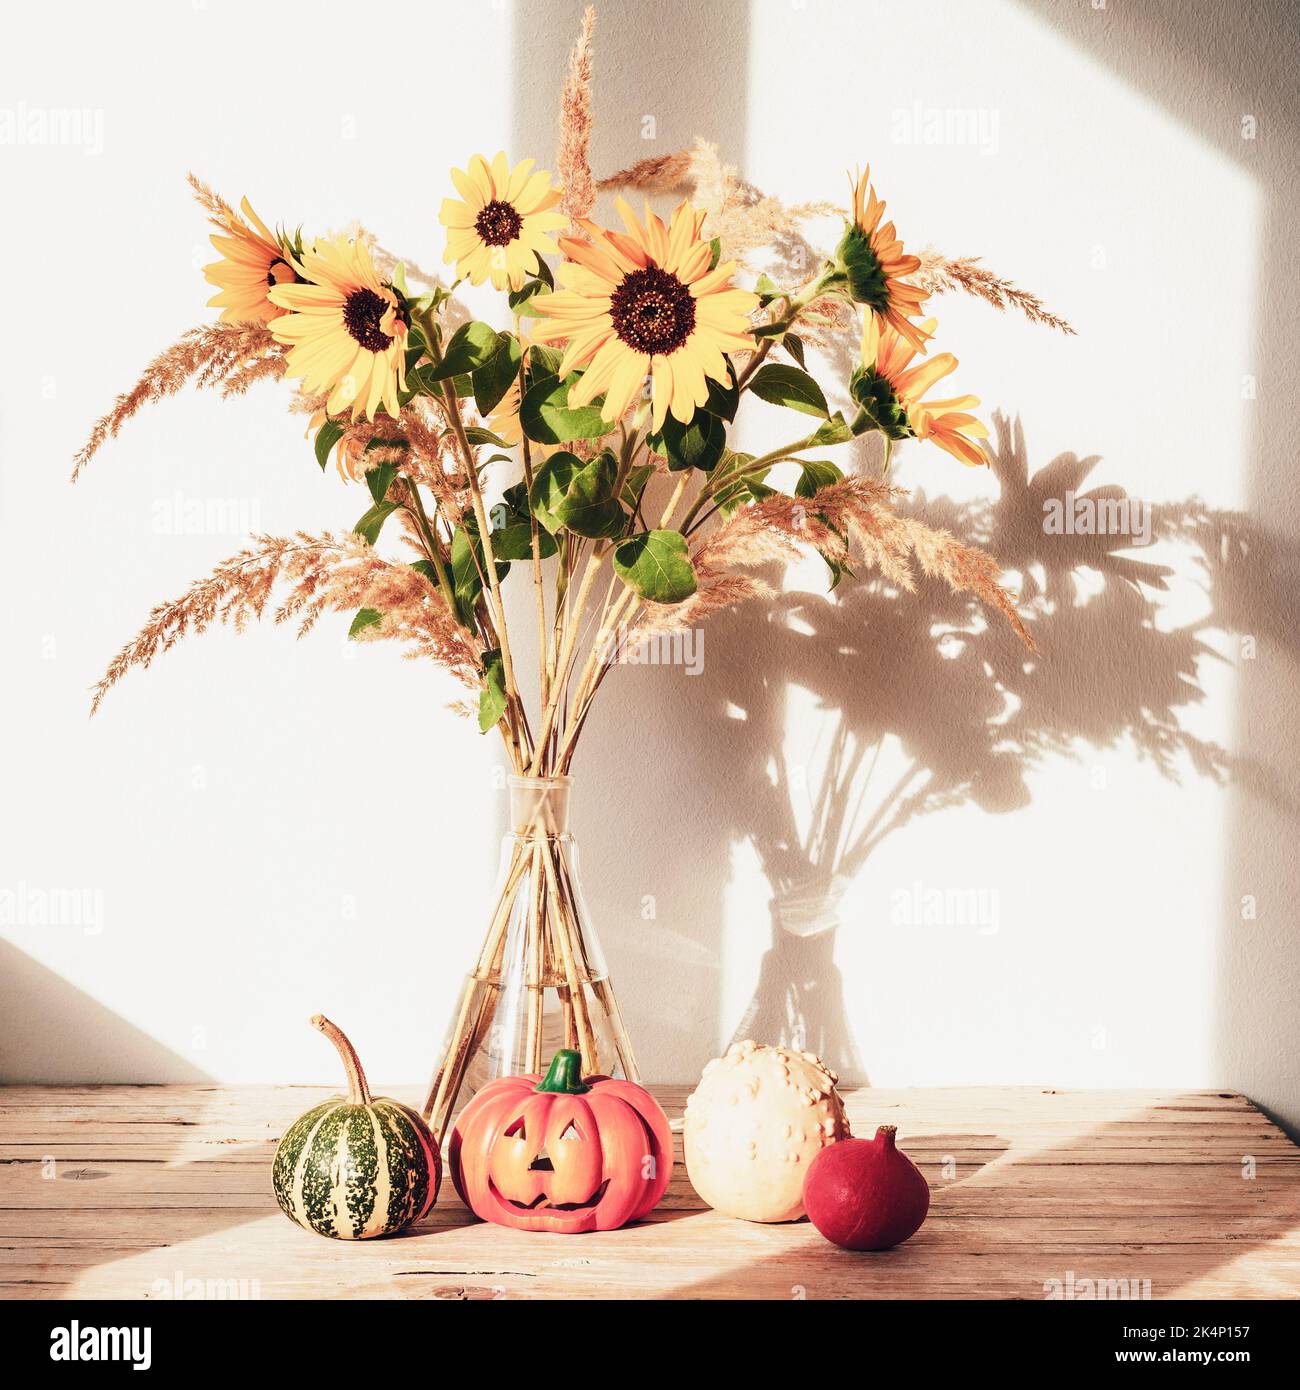 Sunflowers in glass vase with small decorative pumpkins against white wall in sunlight. Thanksgiving concept. Still life. Closeup. Stock Photo